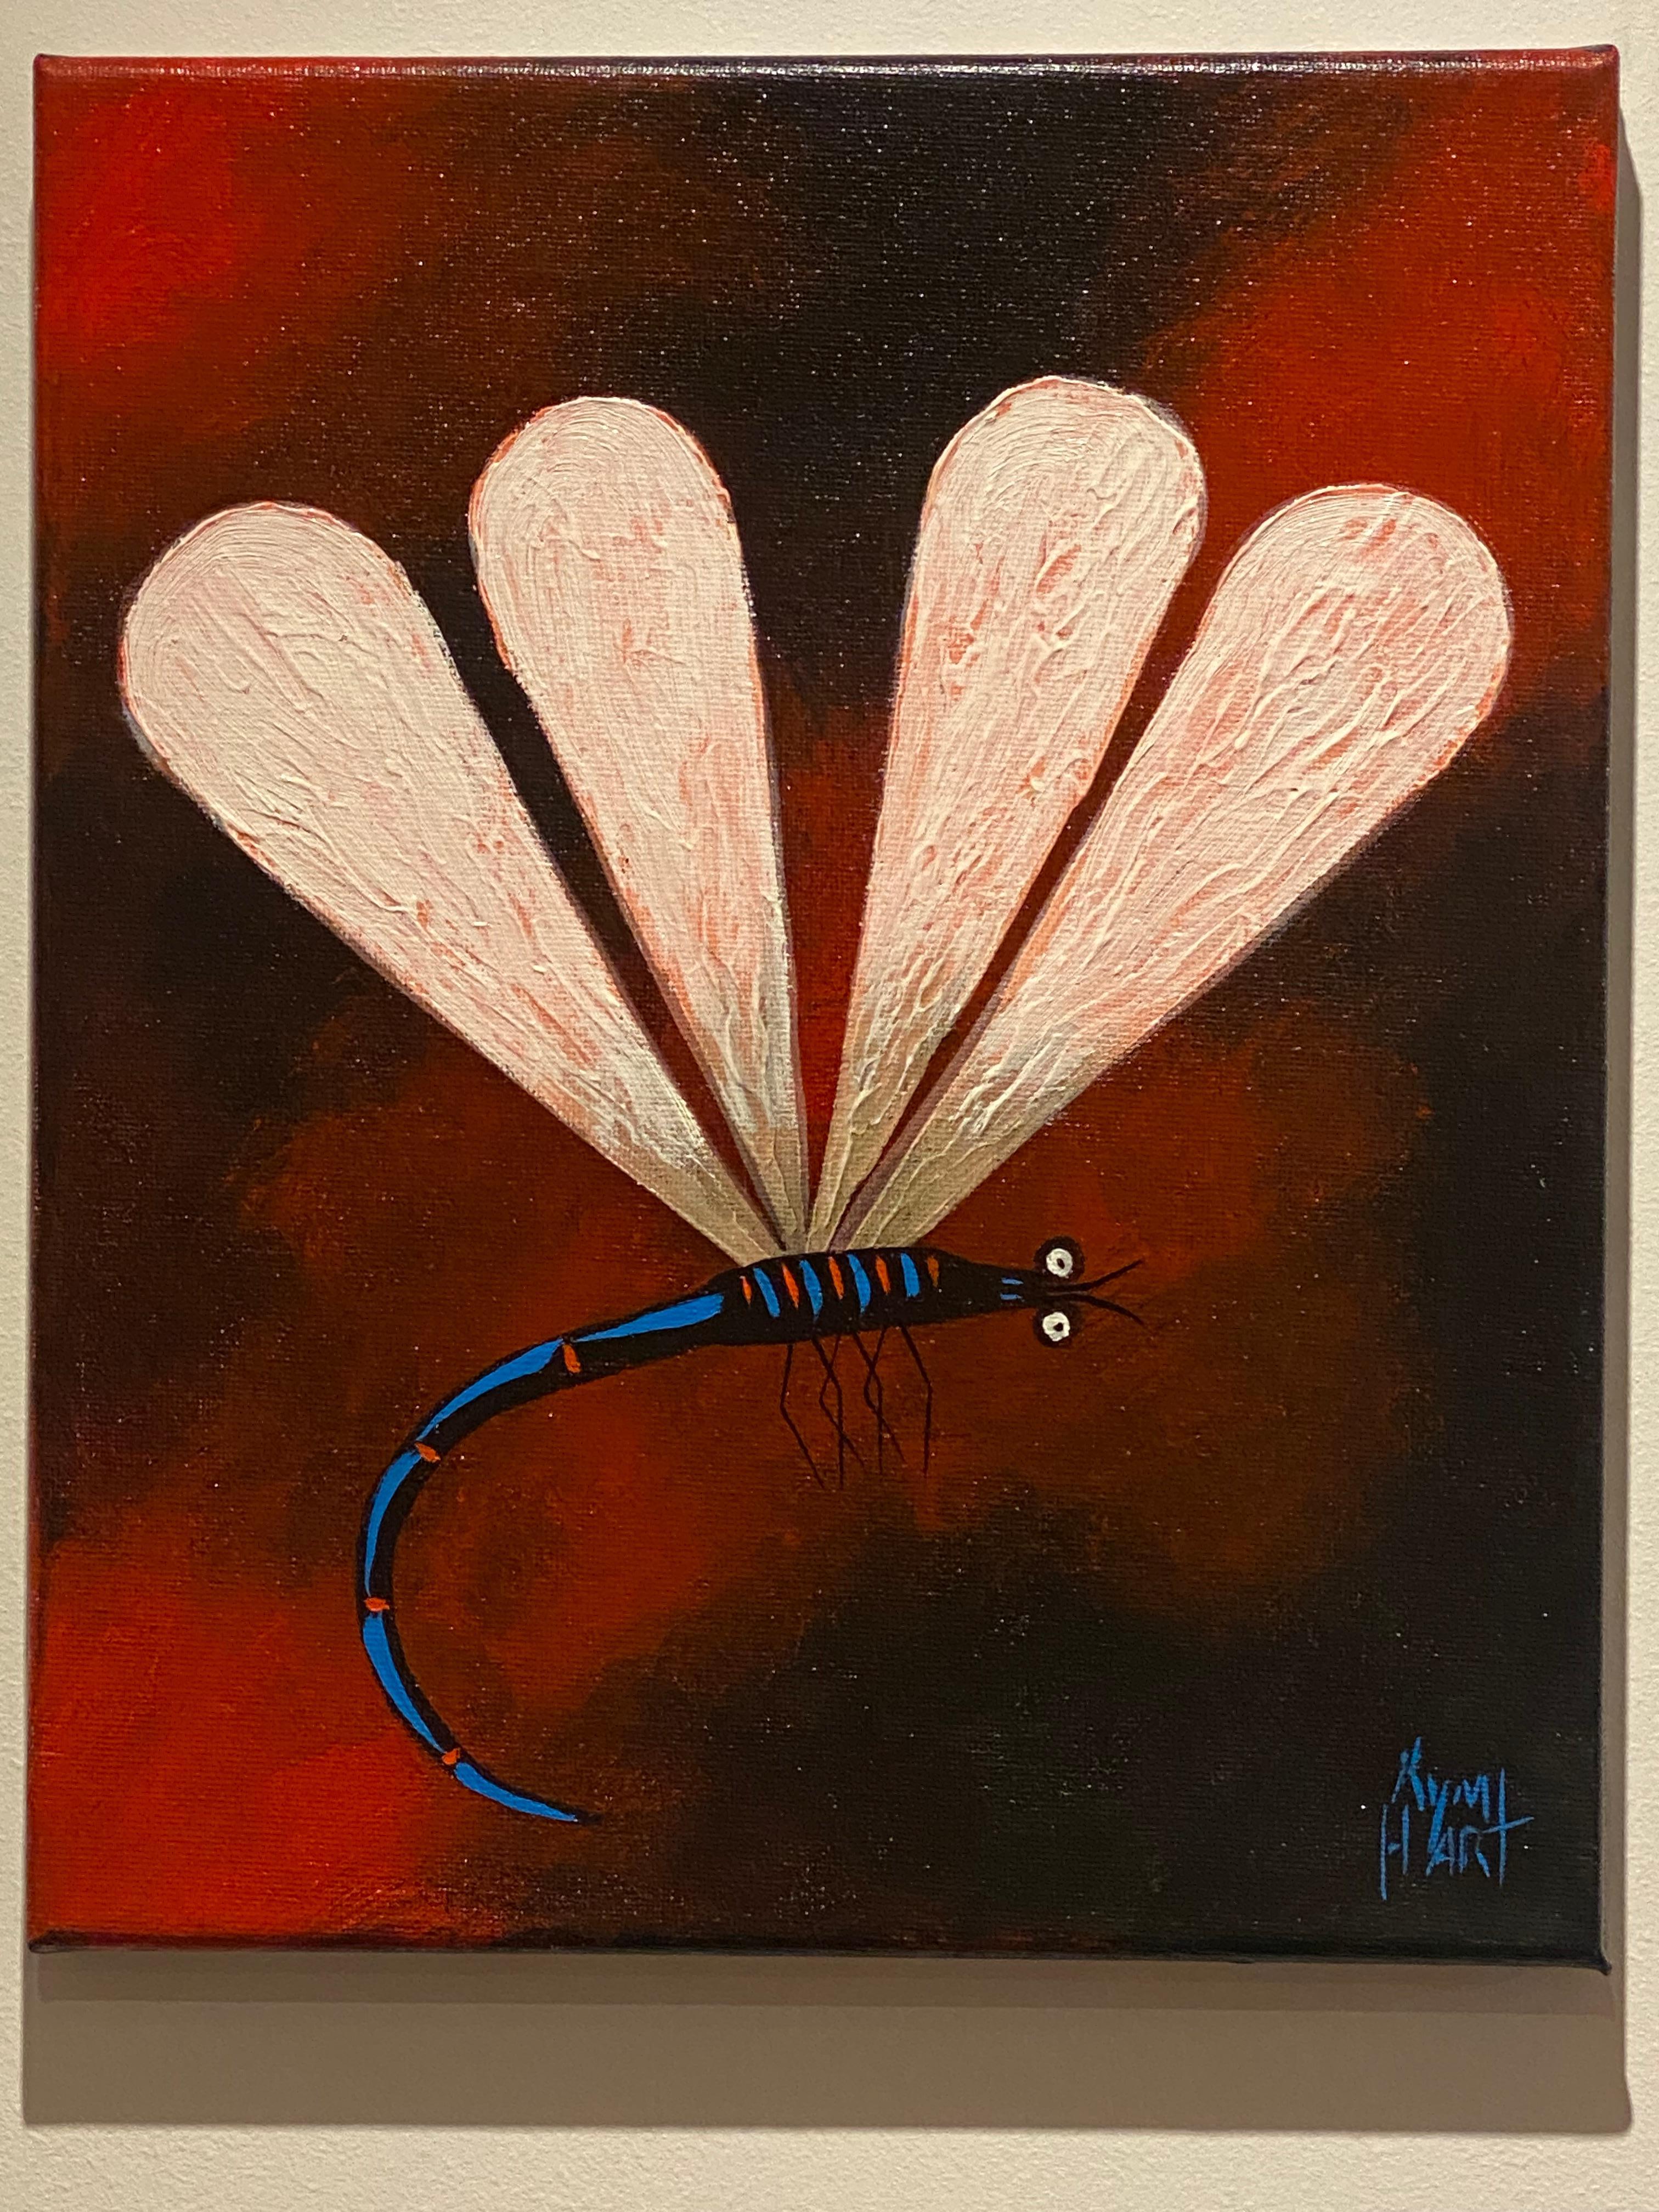 Kym Hart (1963 - ) Dragonfly (Red, Blue, Pink) Oil on Canvas Painting 25 x 20cm. For Sale 1